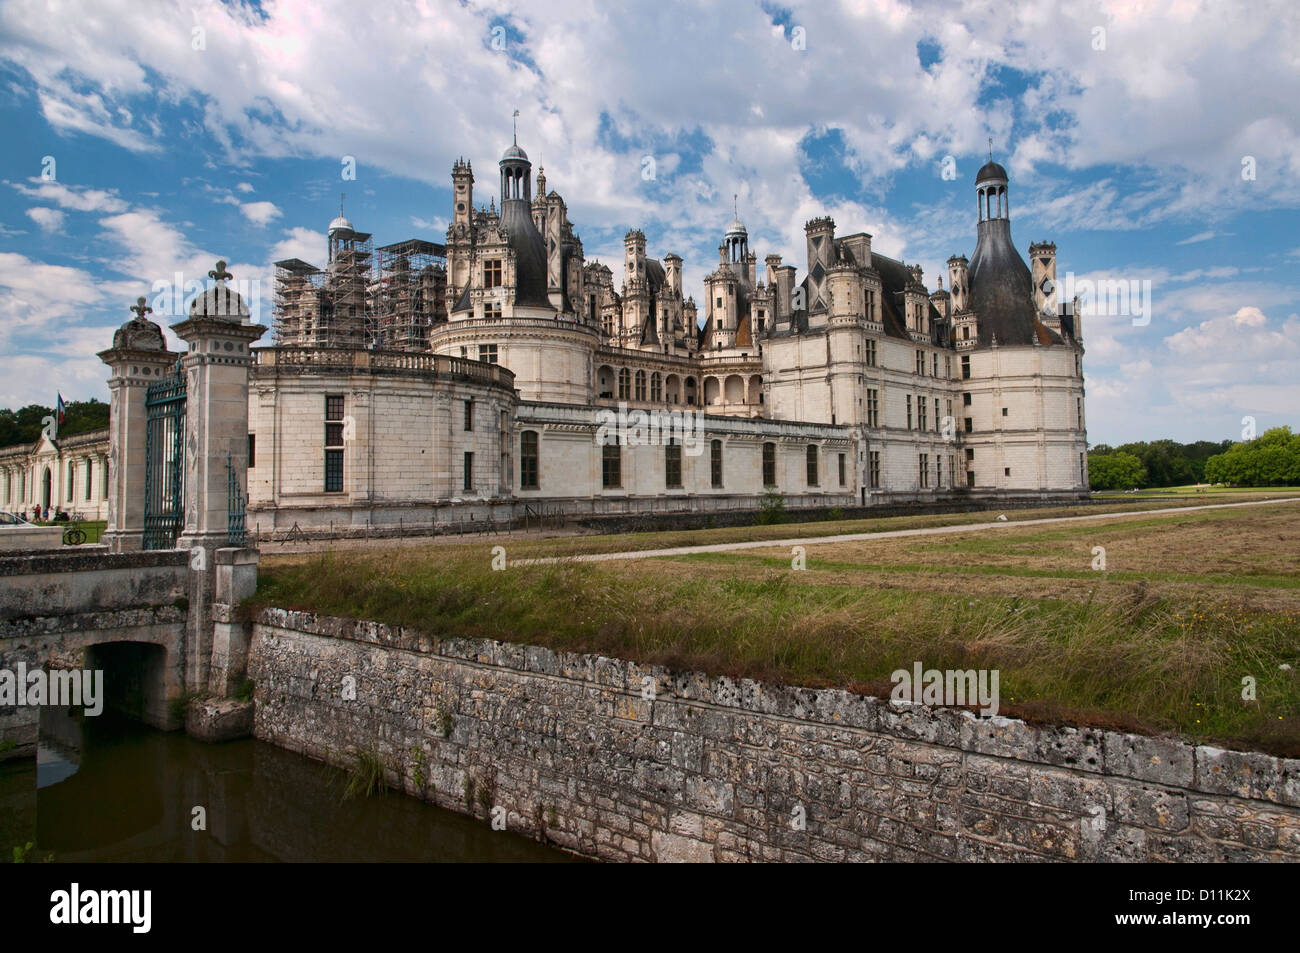 The royal Château de Chambord at Chambord, Loir-et-Cher, France, is one of the most beautiful châteaux in the world. Stock Photo